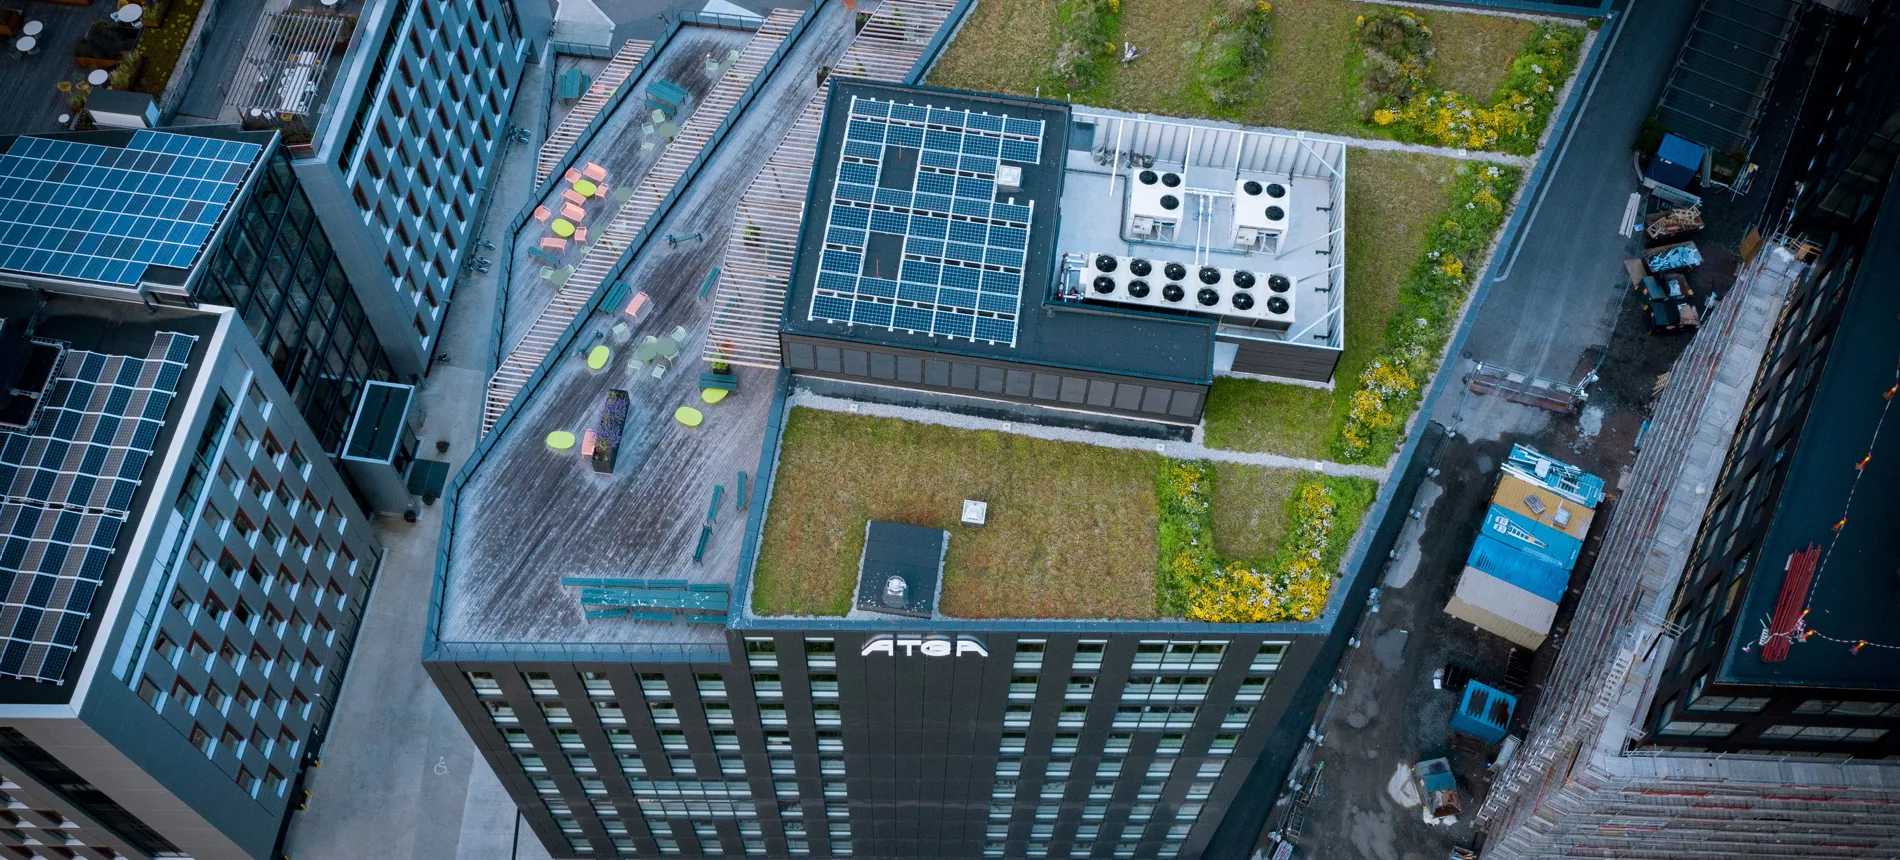 green roof on head office building in norway